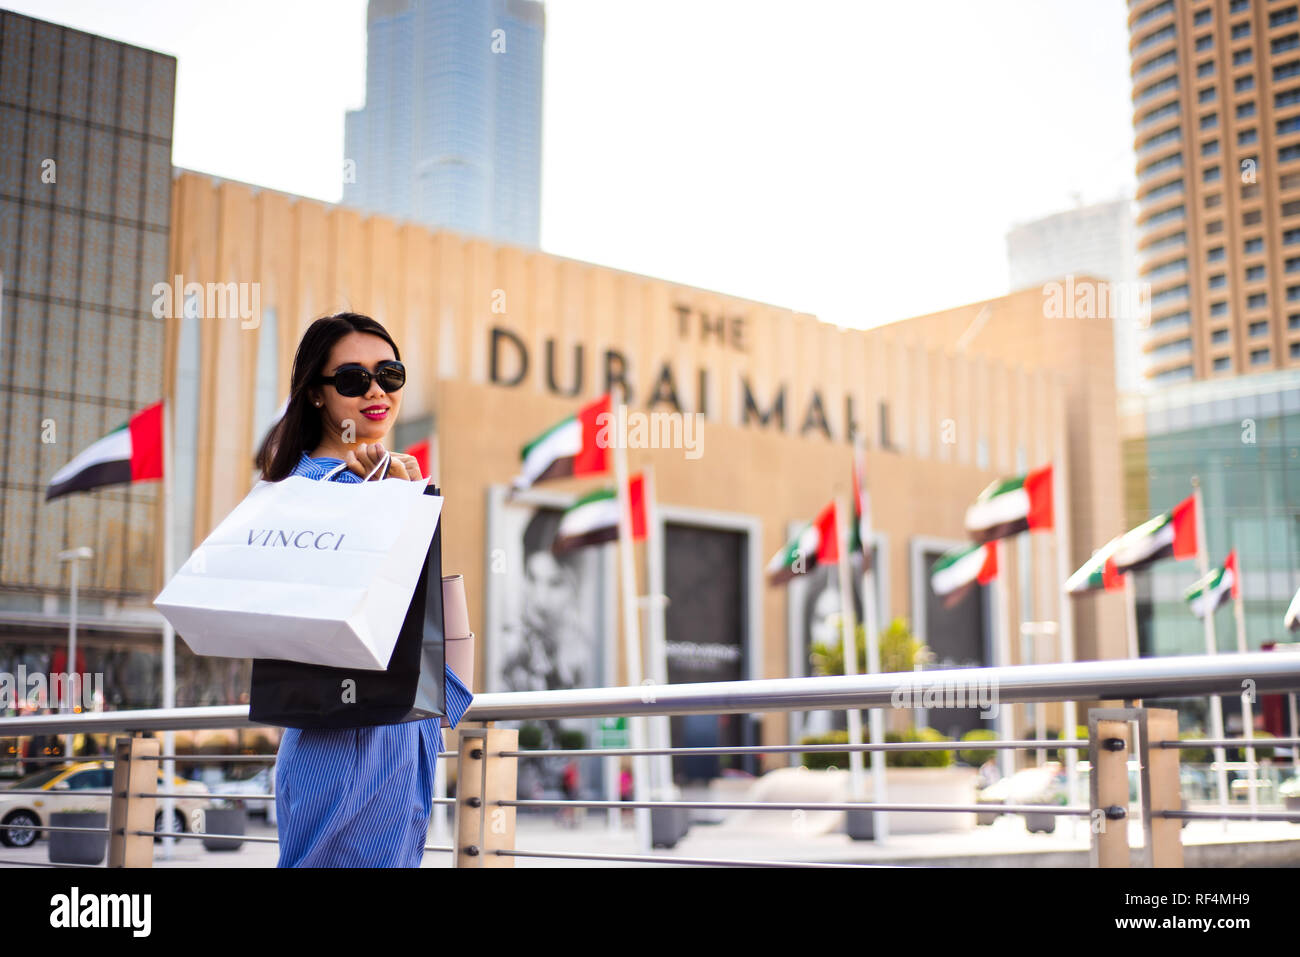 Dubai, United Arab Emirates - March 26, 2018: Asian tourist in front of Dubai mall main entrance with shopping bags Stock Photo